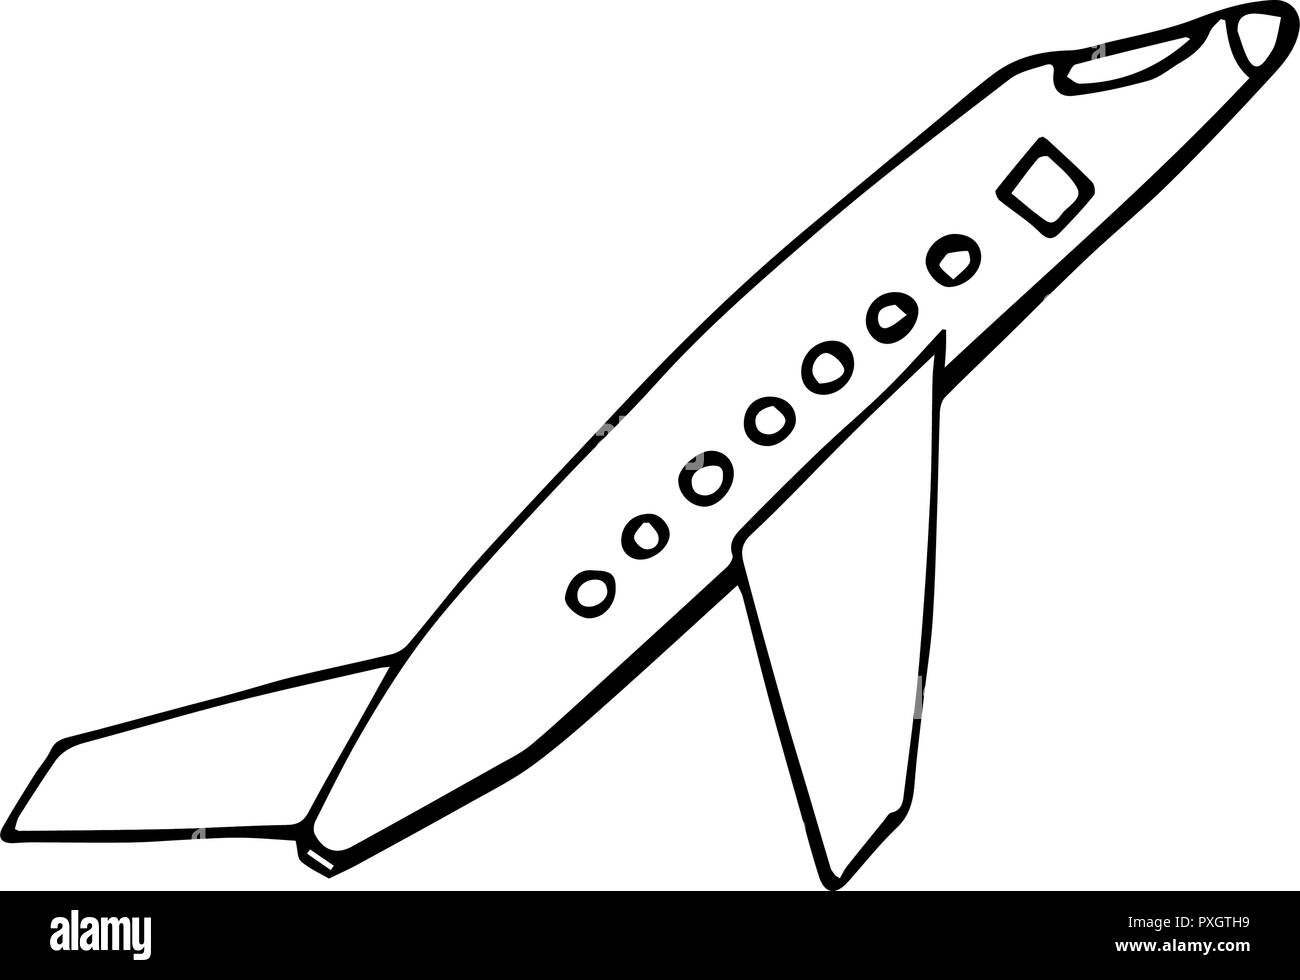 Abstract vector illustration of an air plane. Grunge free hand drawing. Stock Vector